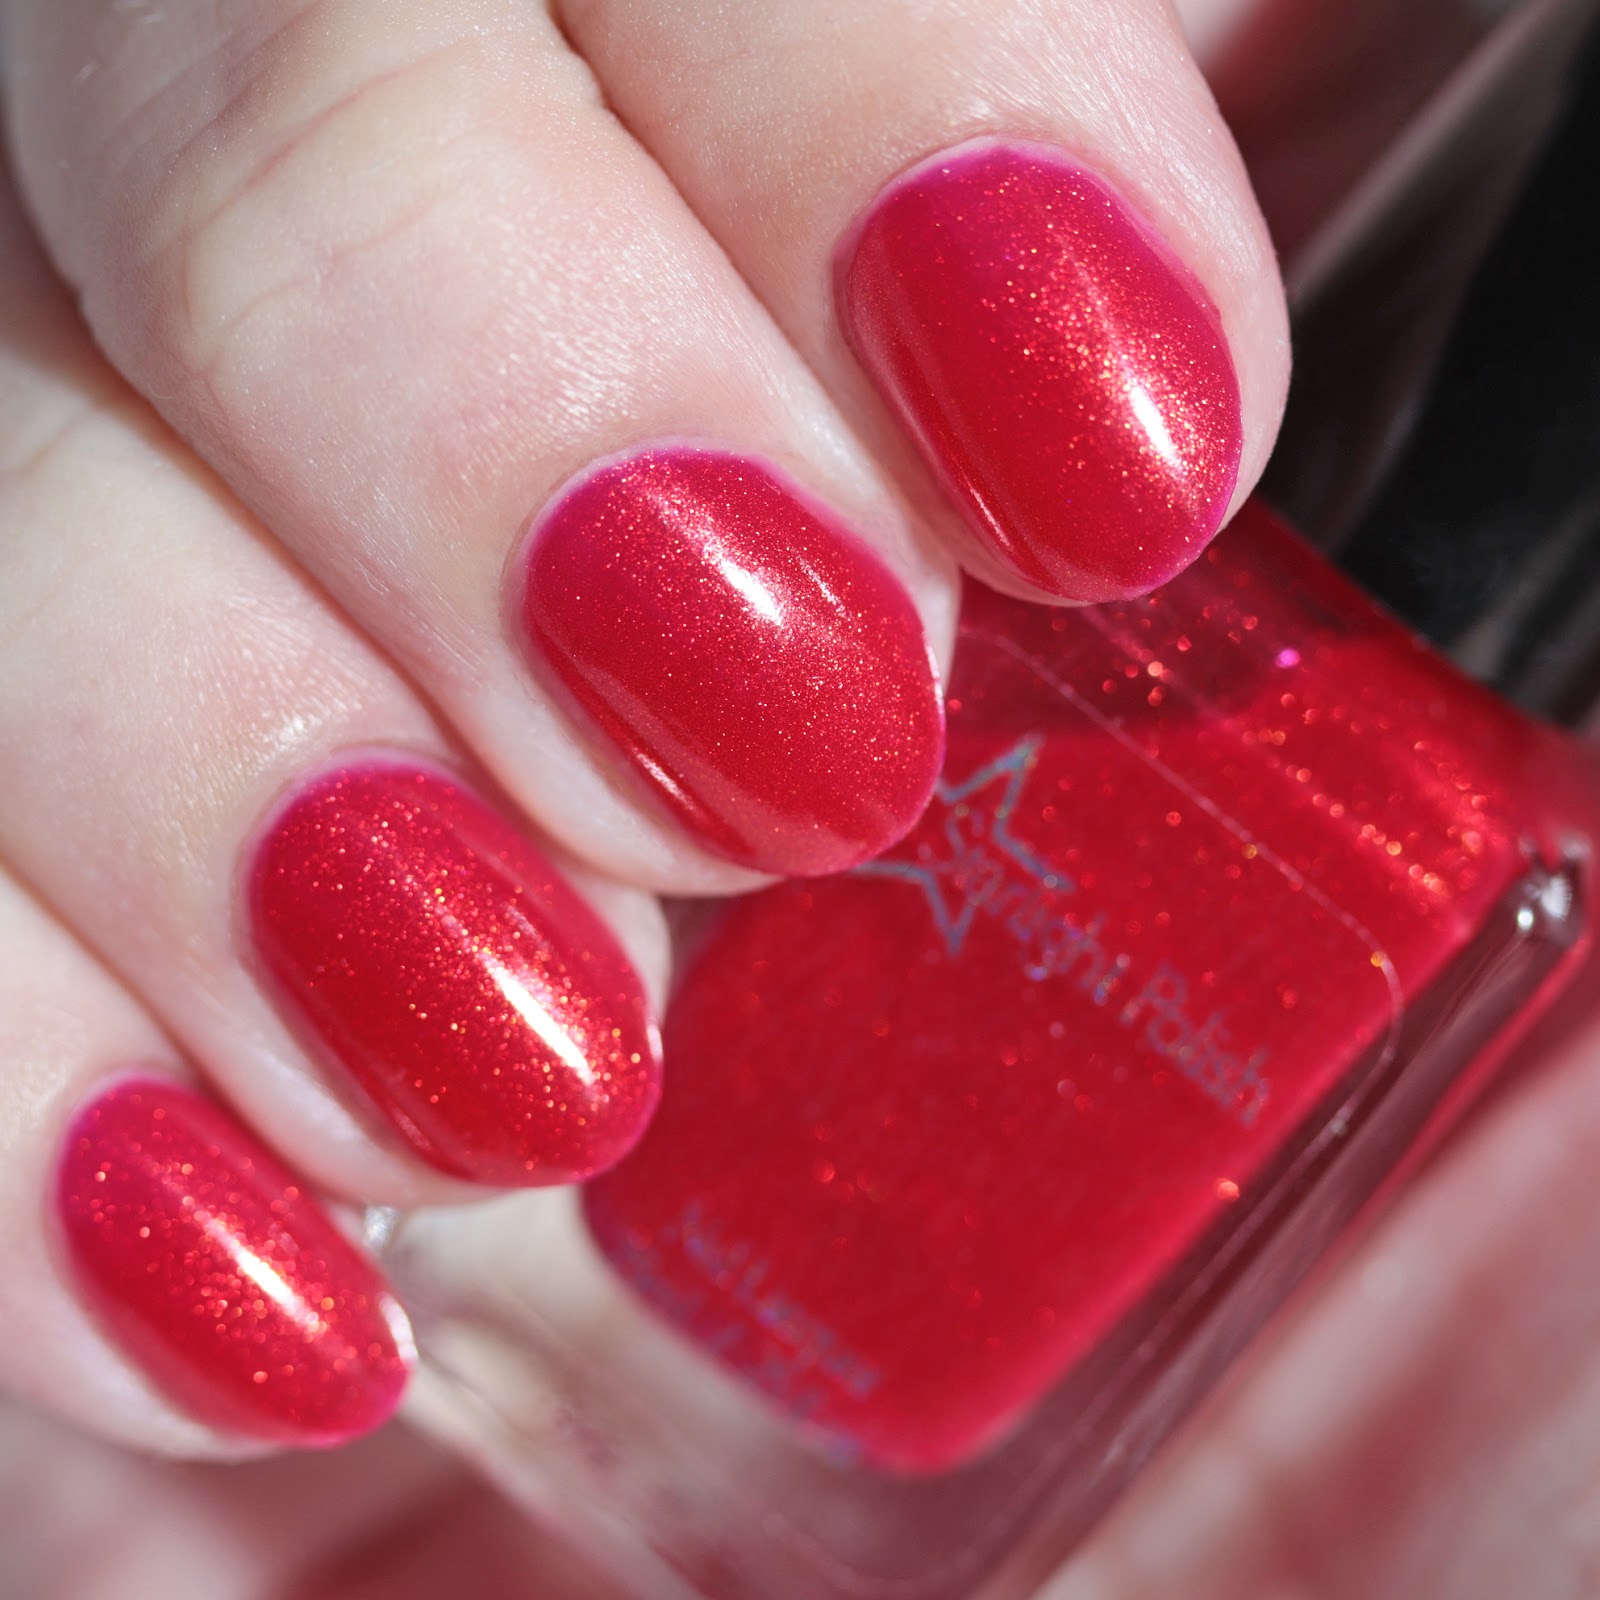 GOT Polish Challenge – Pink! | The Adorned Claw